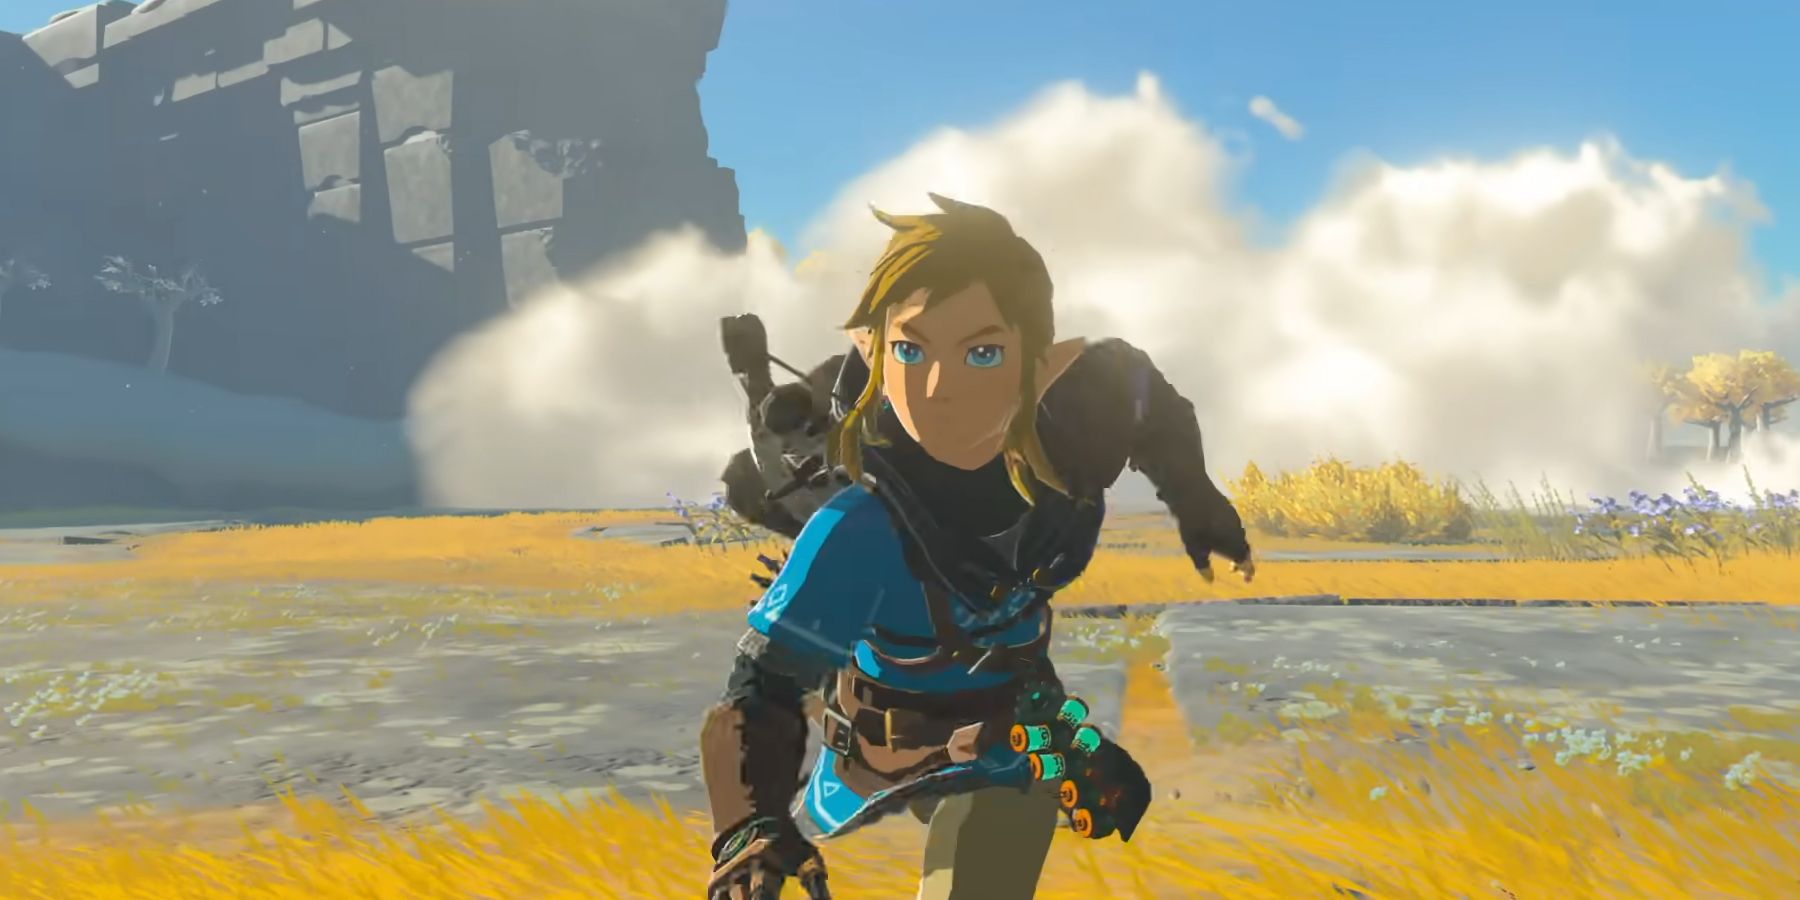 Link (center) running in his blue tunic, with weapons on hs back, and a multi-canstered device on his hip. Image source: Nintendo